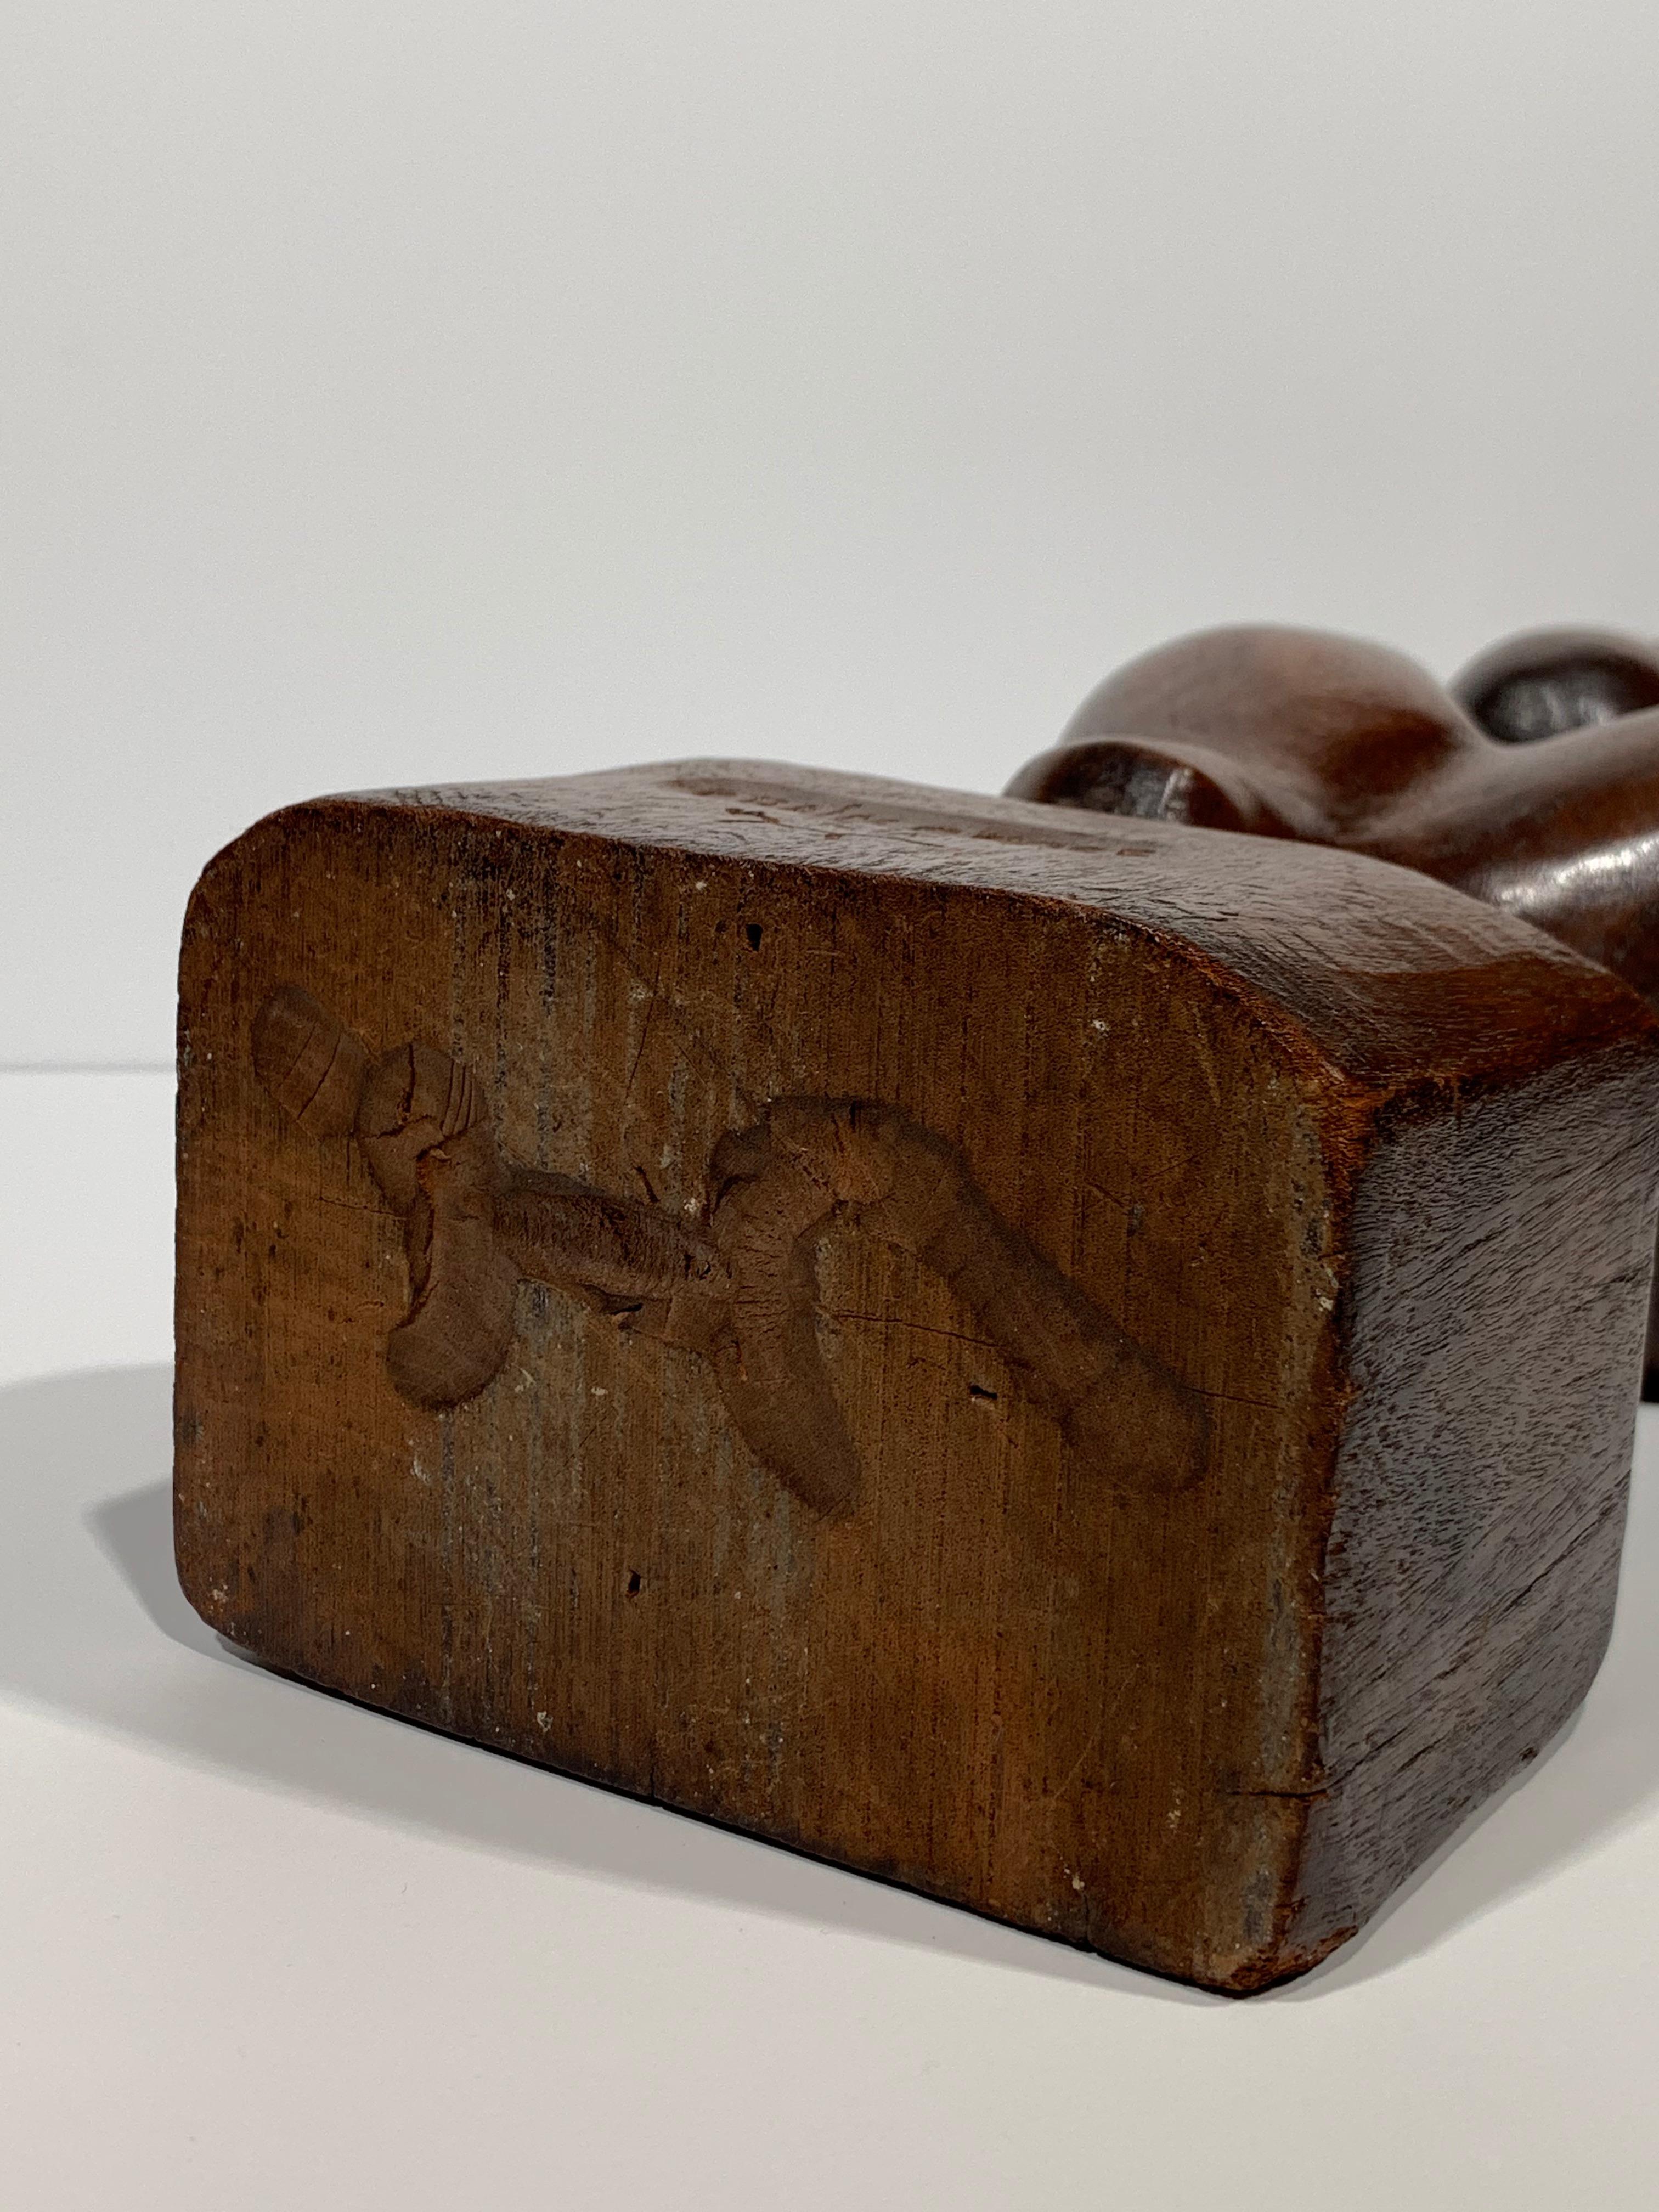 Beautiful sculpture by American artist, Chaim Gross (1904-1991). Woman Brushing Hair, c.1930. Carved mahogany, figure measures 22 inches h; 5.75 inches w; 4 inches d. Signed at base. Excellent condition with one naturally occurring split on the